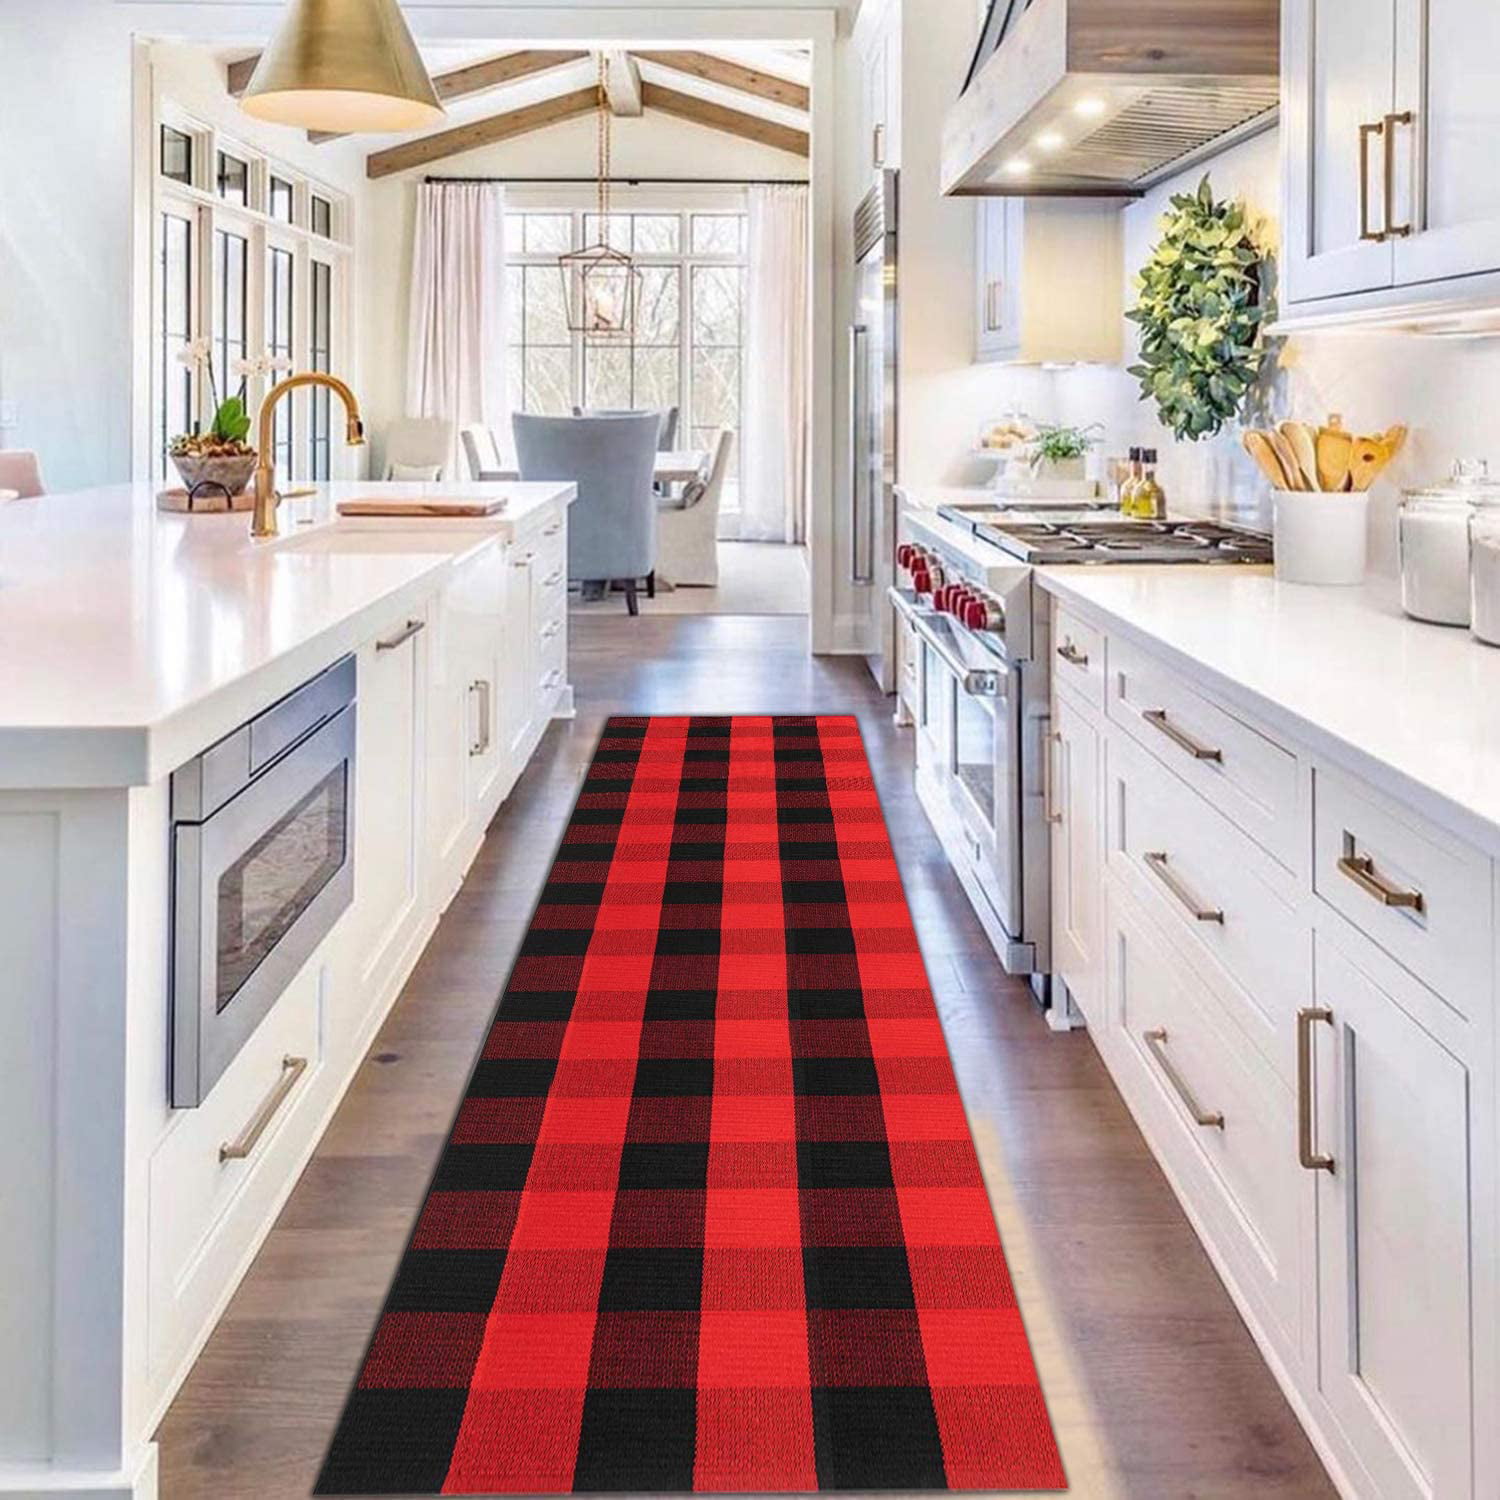 Buffalo Plaid Runner Rug Red And Black, Red And Black Buffalo Check Kitchen Rug